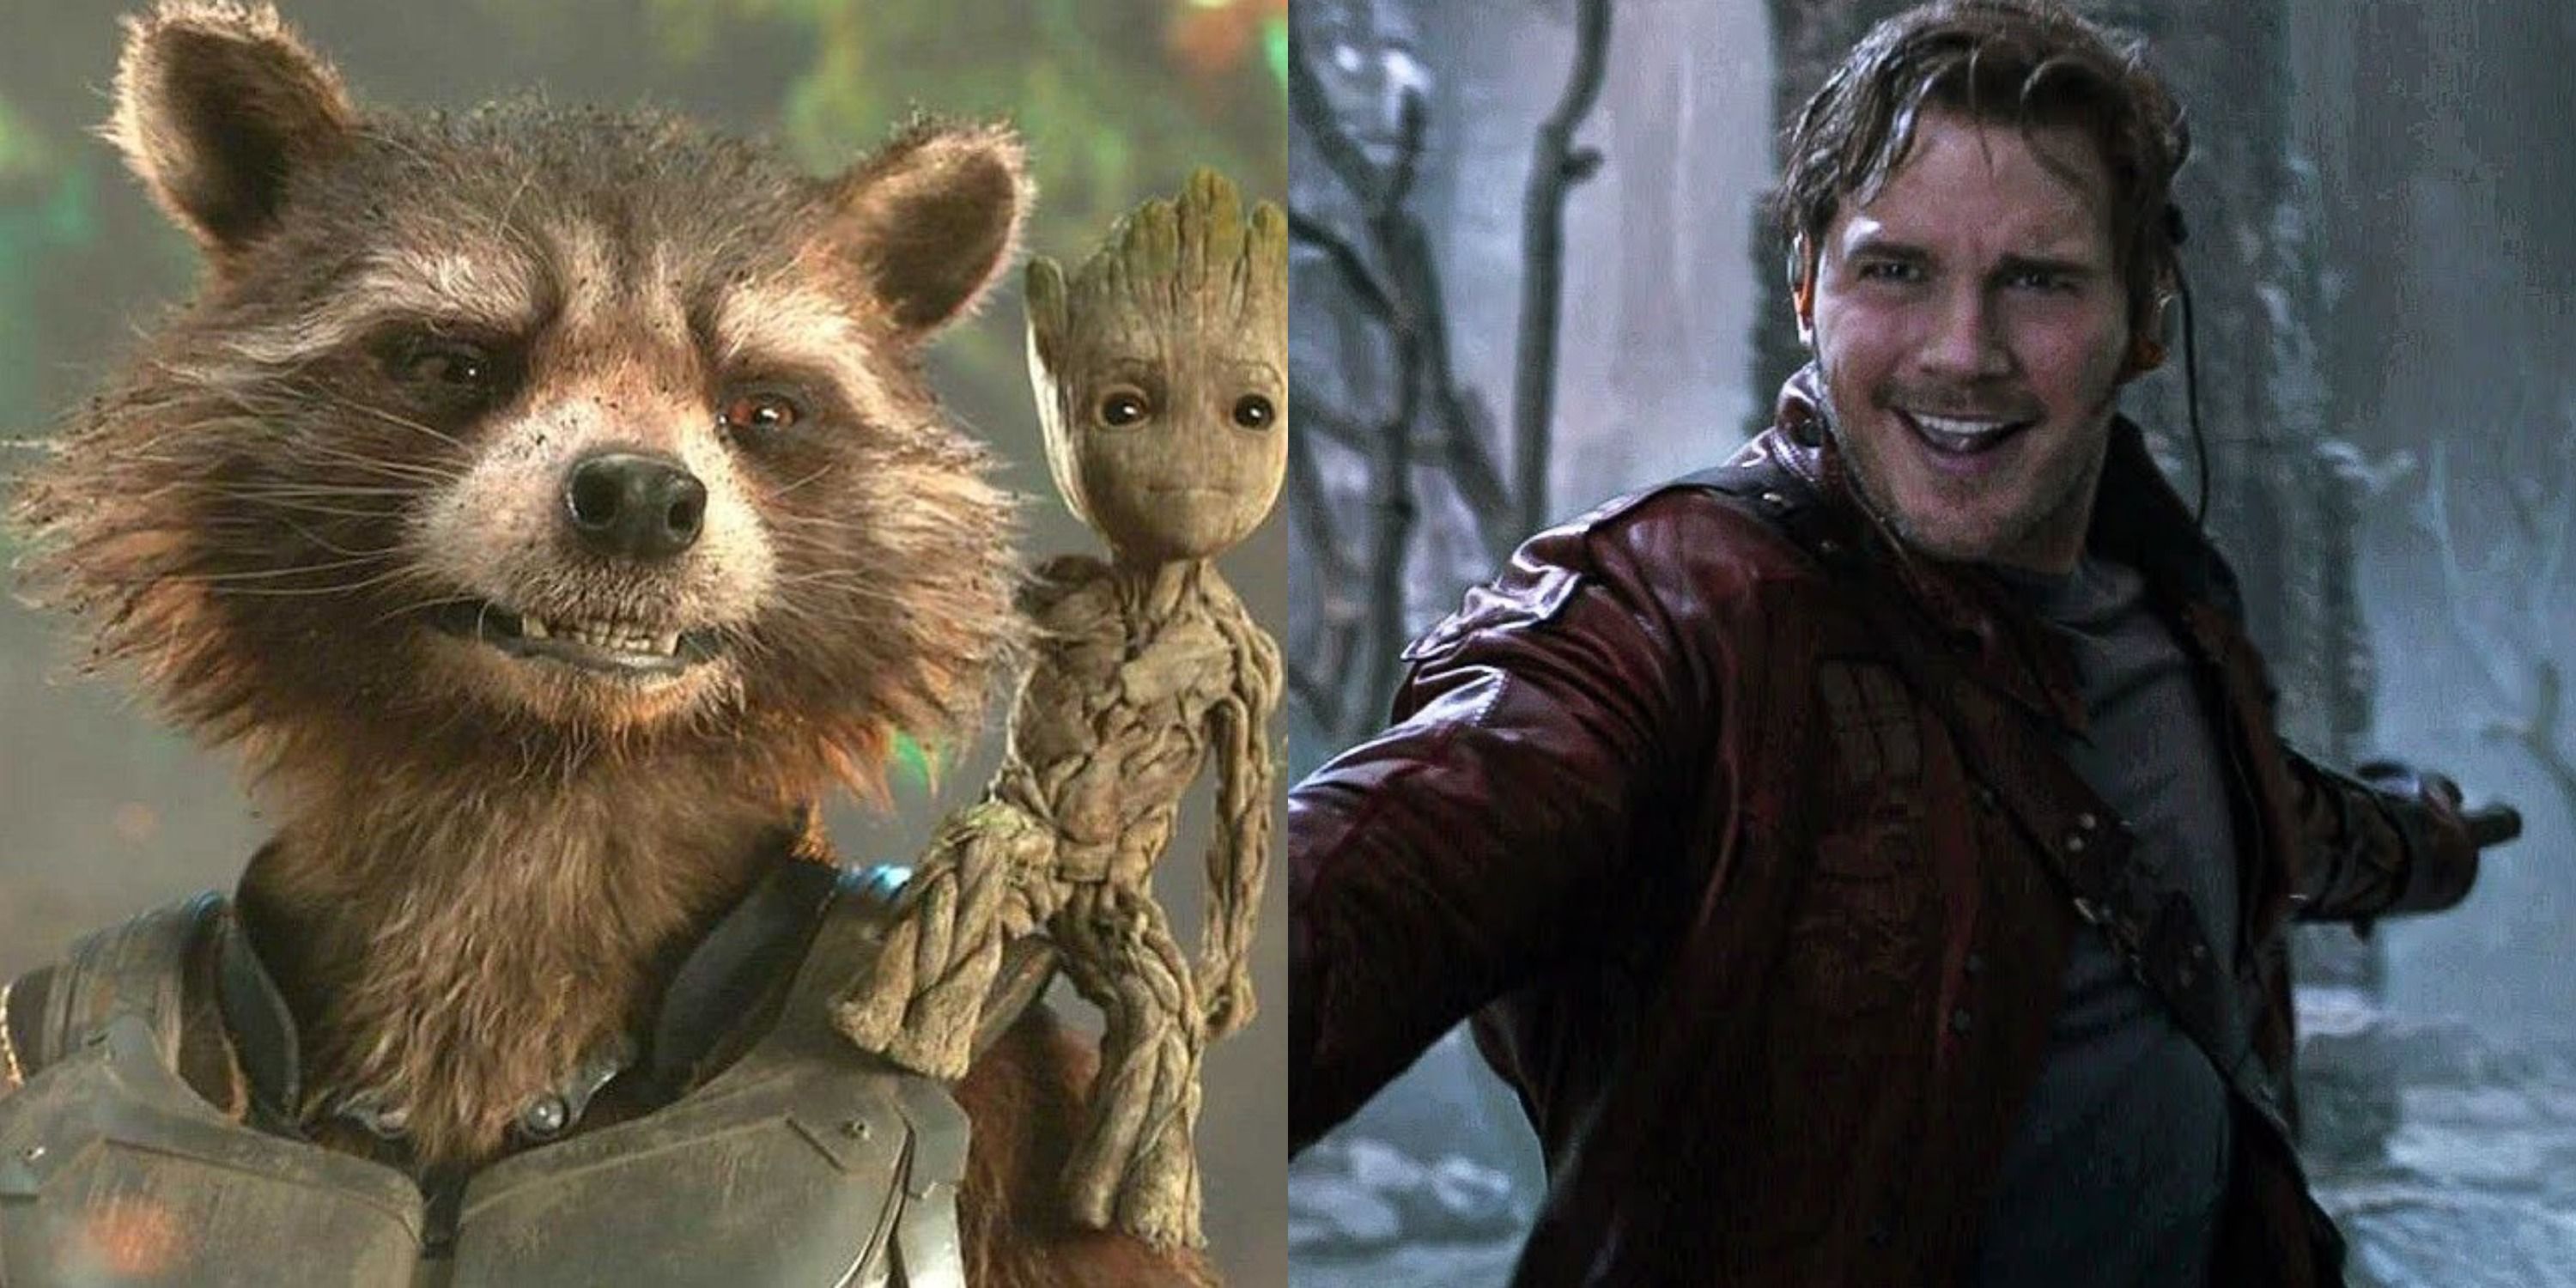 Featured image Rocket Raccoon with Groot on his shoulder and Chris Pratt in Guardians of the Galaxy